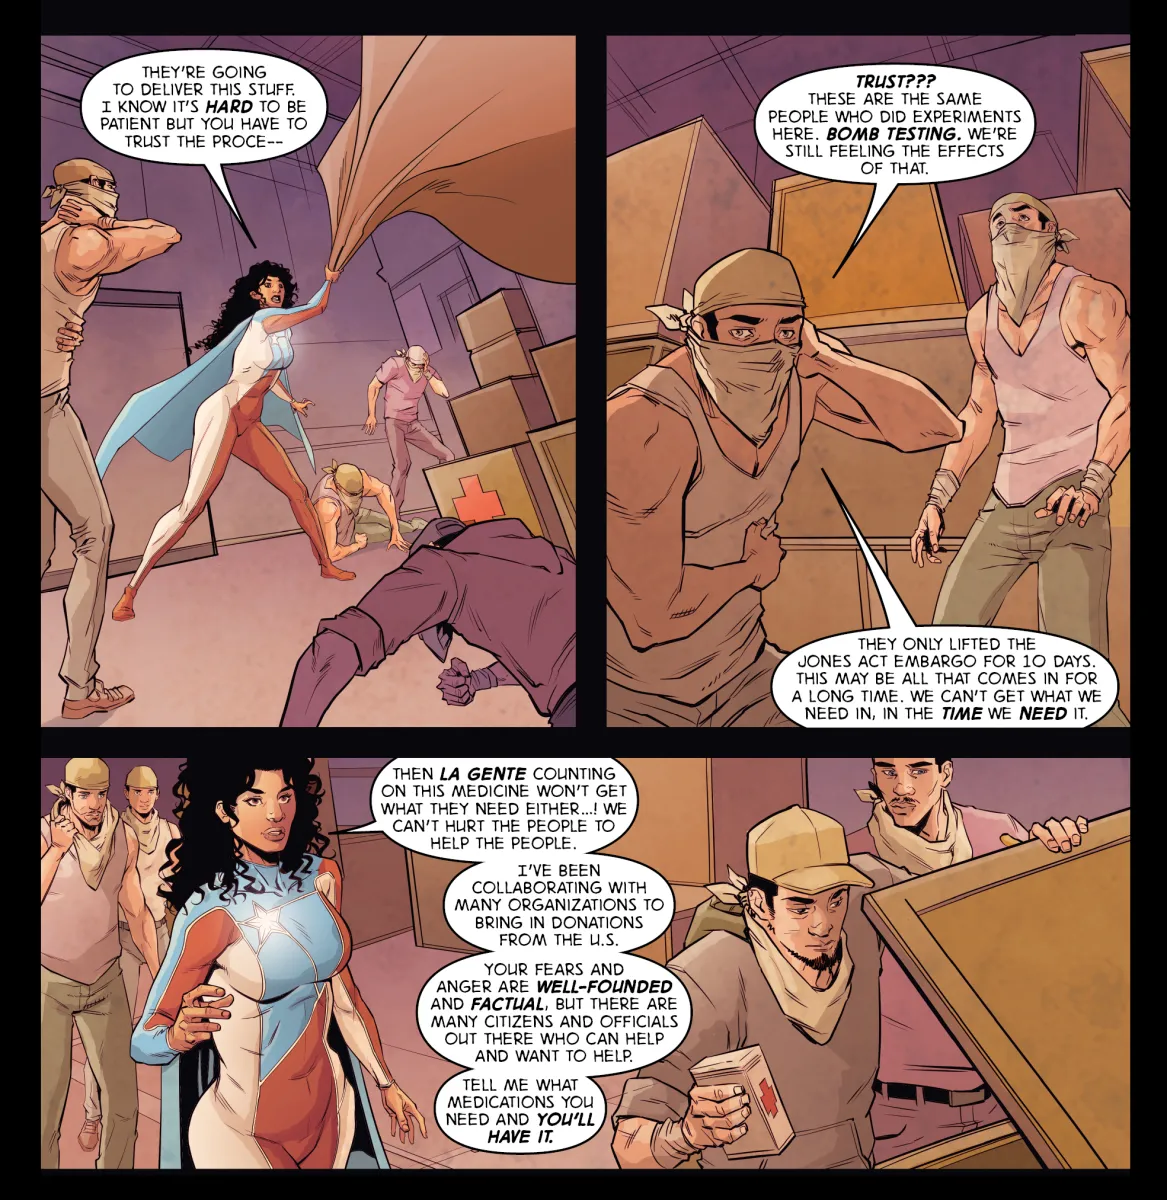 Story by Rosario Dawson and Gus Vazquez for the "Ricanstruction" anthology for Puerto Rico